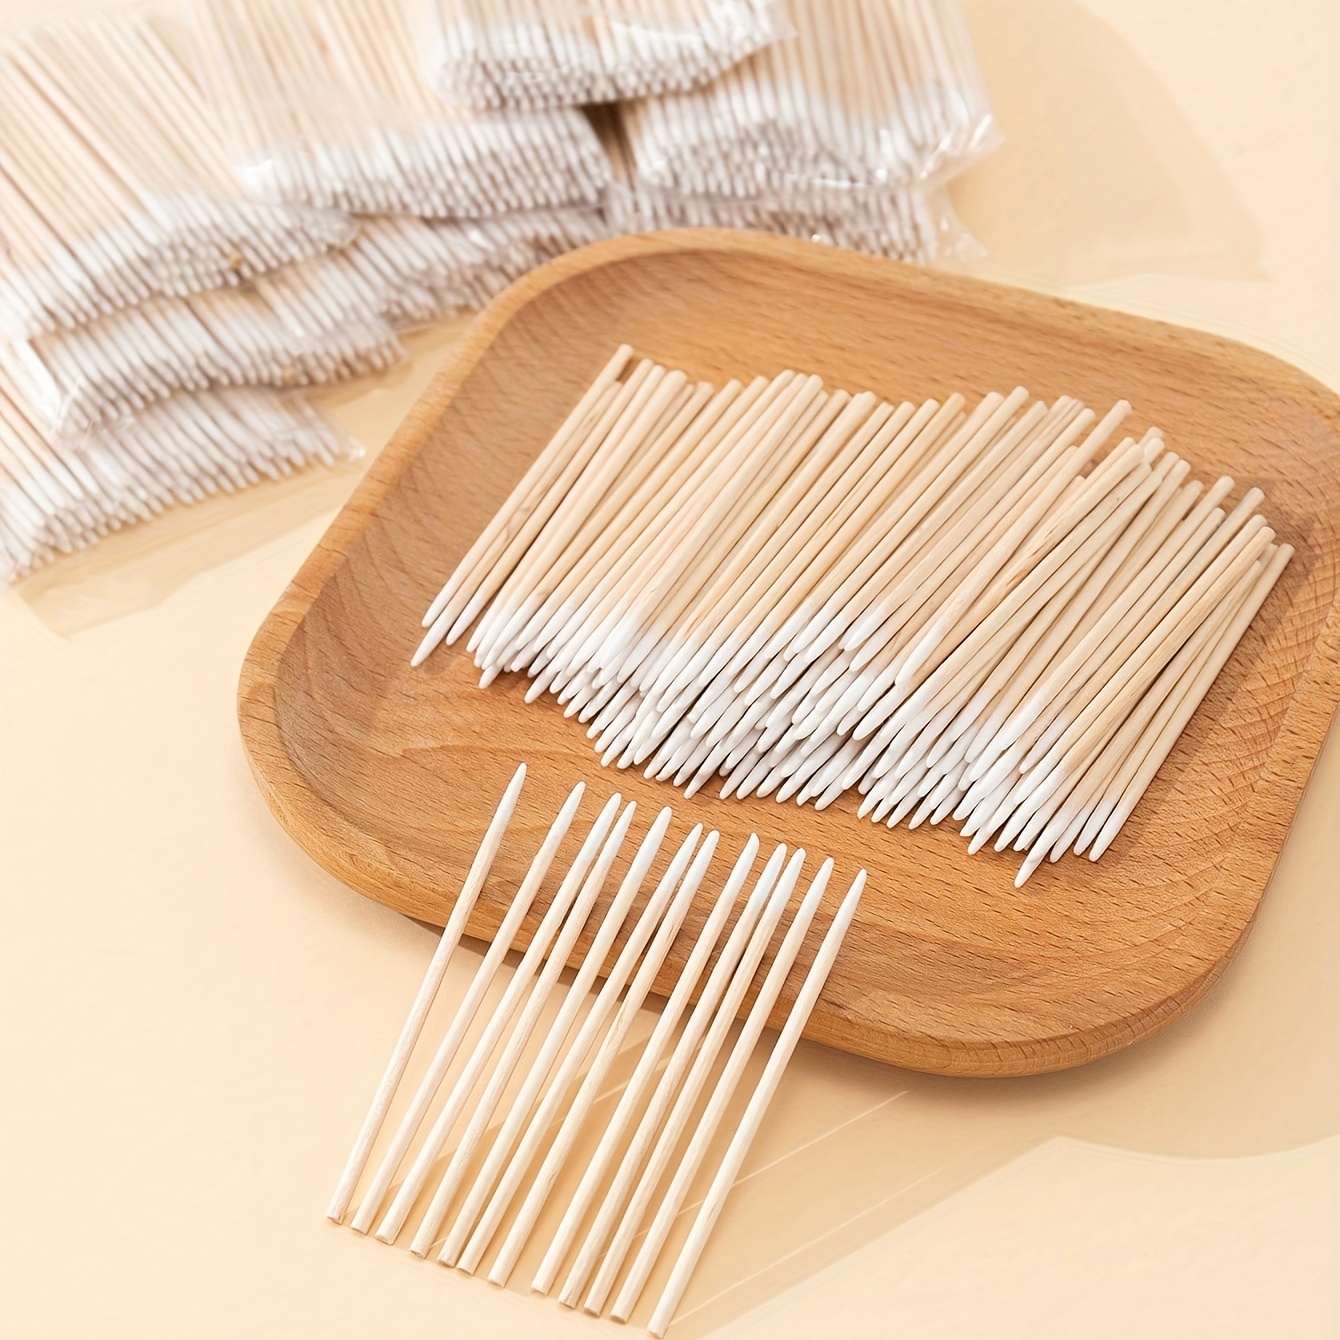 

1000pcs Microblading Cotton Swab, Cotton Swabs Pointed Tip, Cotton Tipped Applicator, Tattoo Permanent Supplies, Makeup Cosmetic Applicator Sticks - White